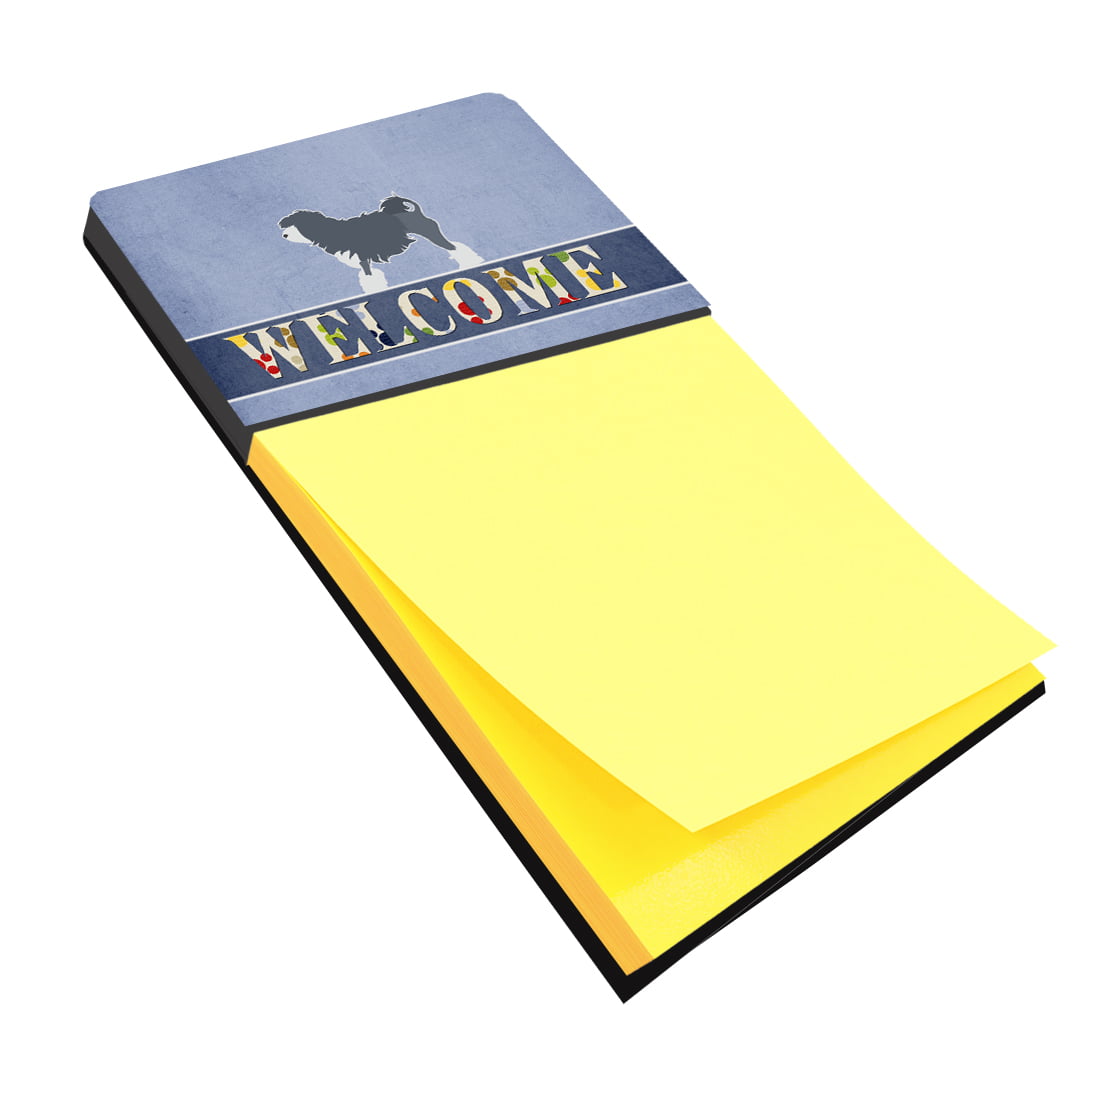 Bb5539sn Lowchen Welcome Sticky Note Holder